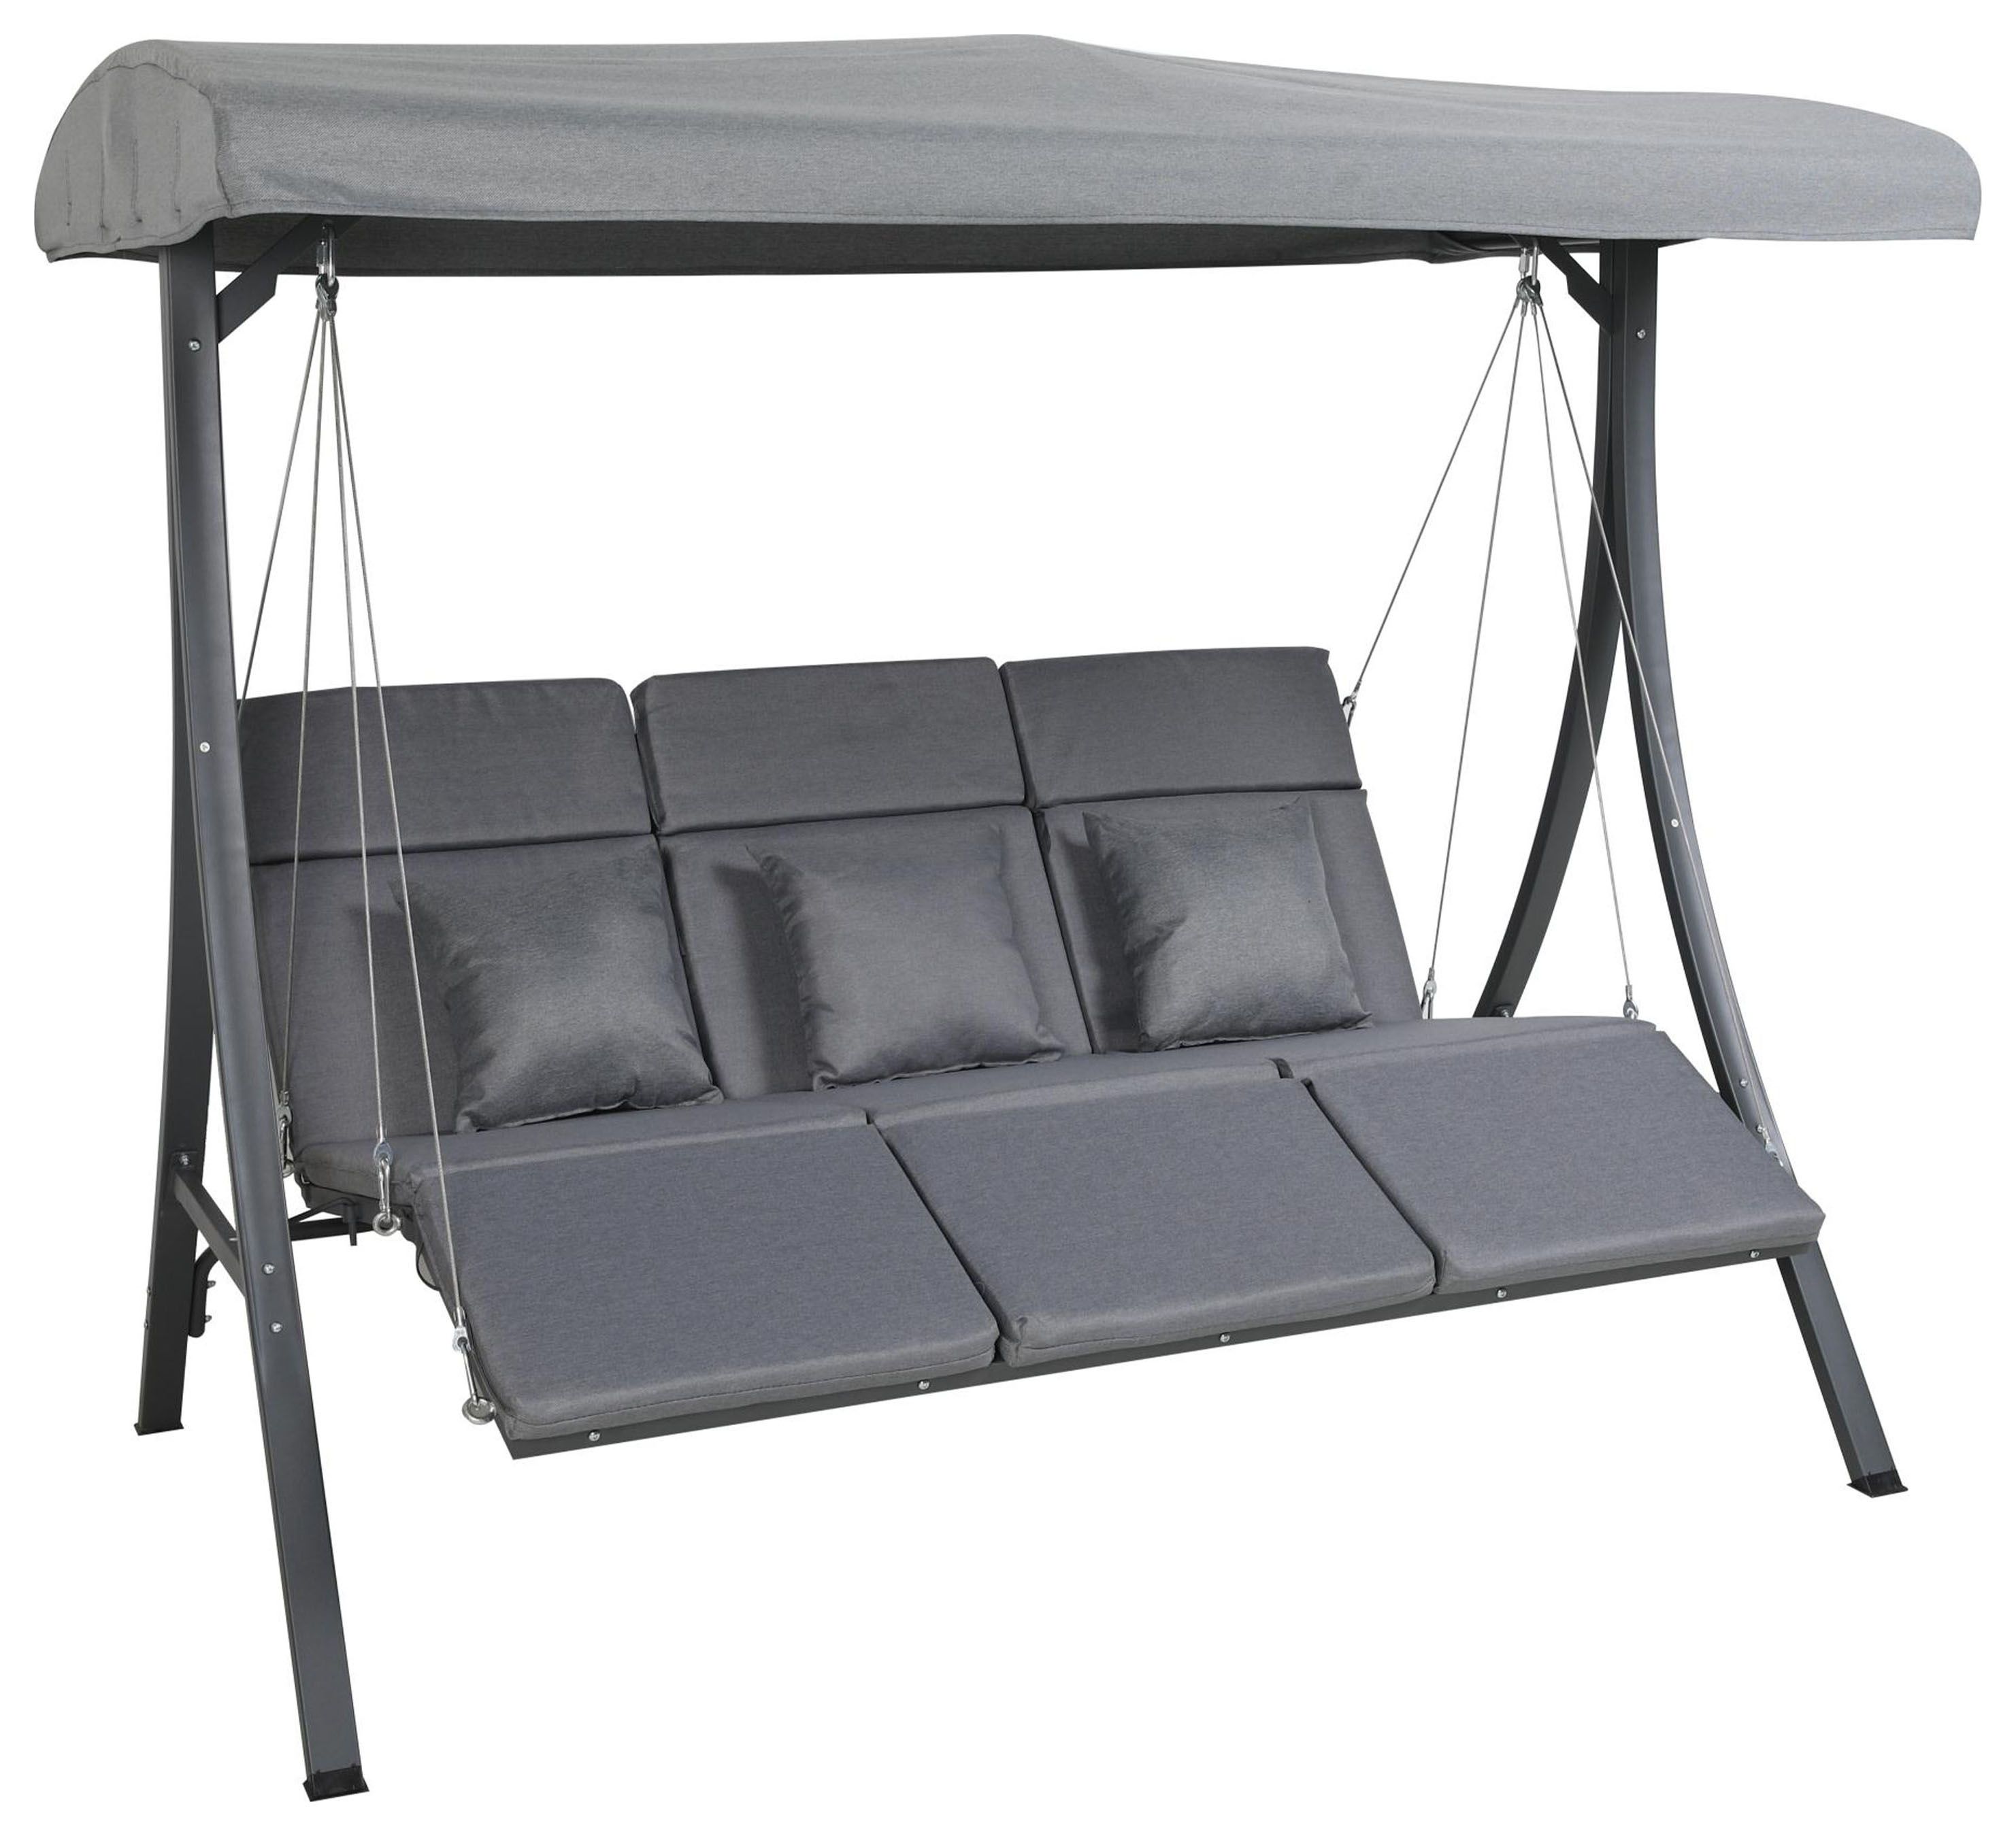 Image of Charles Bentley 3 Seater Garden Lounger Swing Chair - Grey